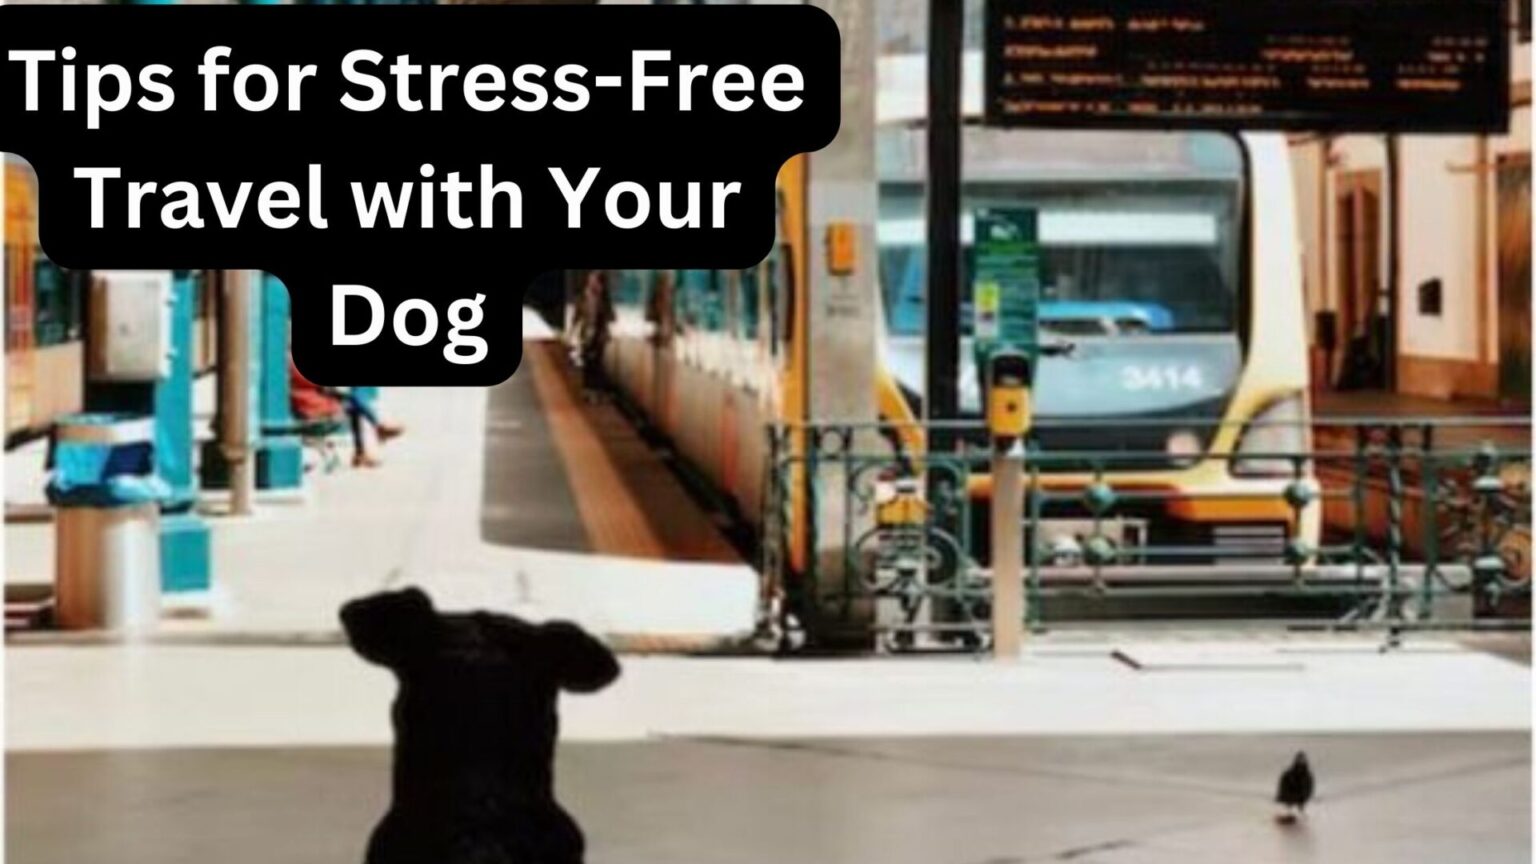 Tips for Stress-Free Travel with Your Dog